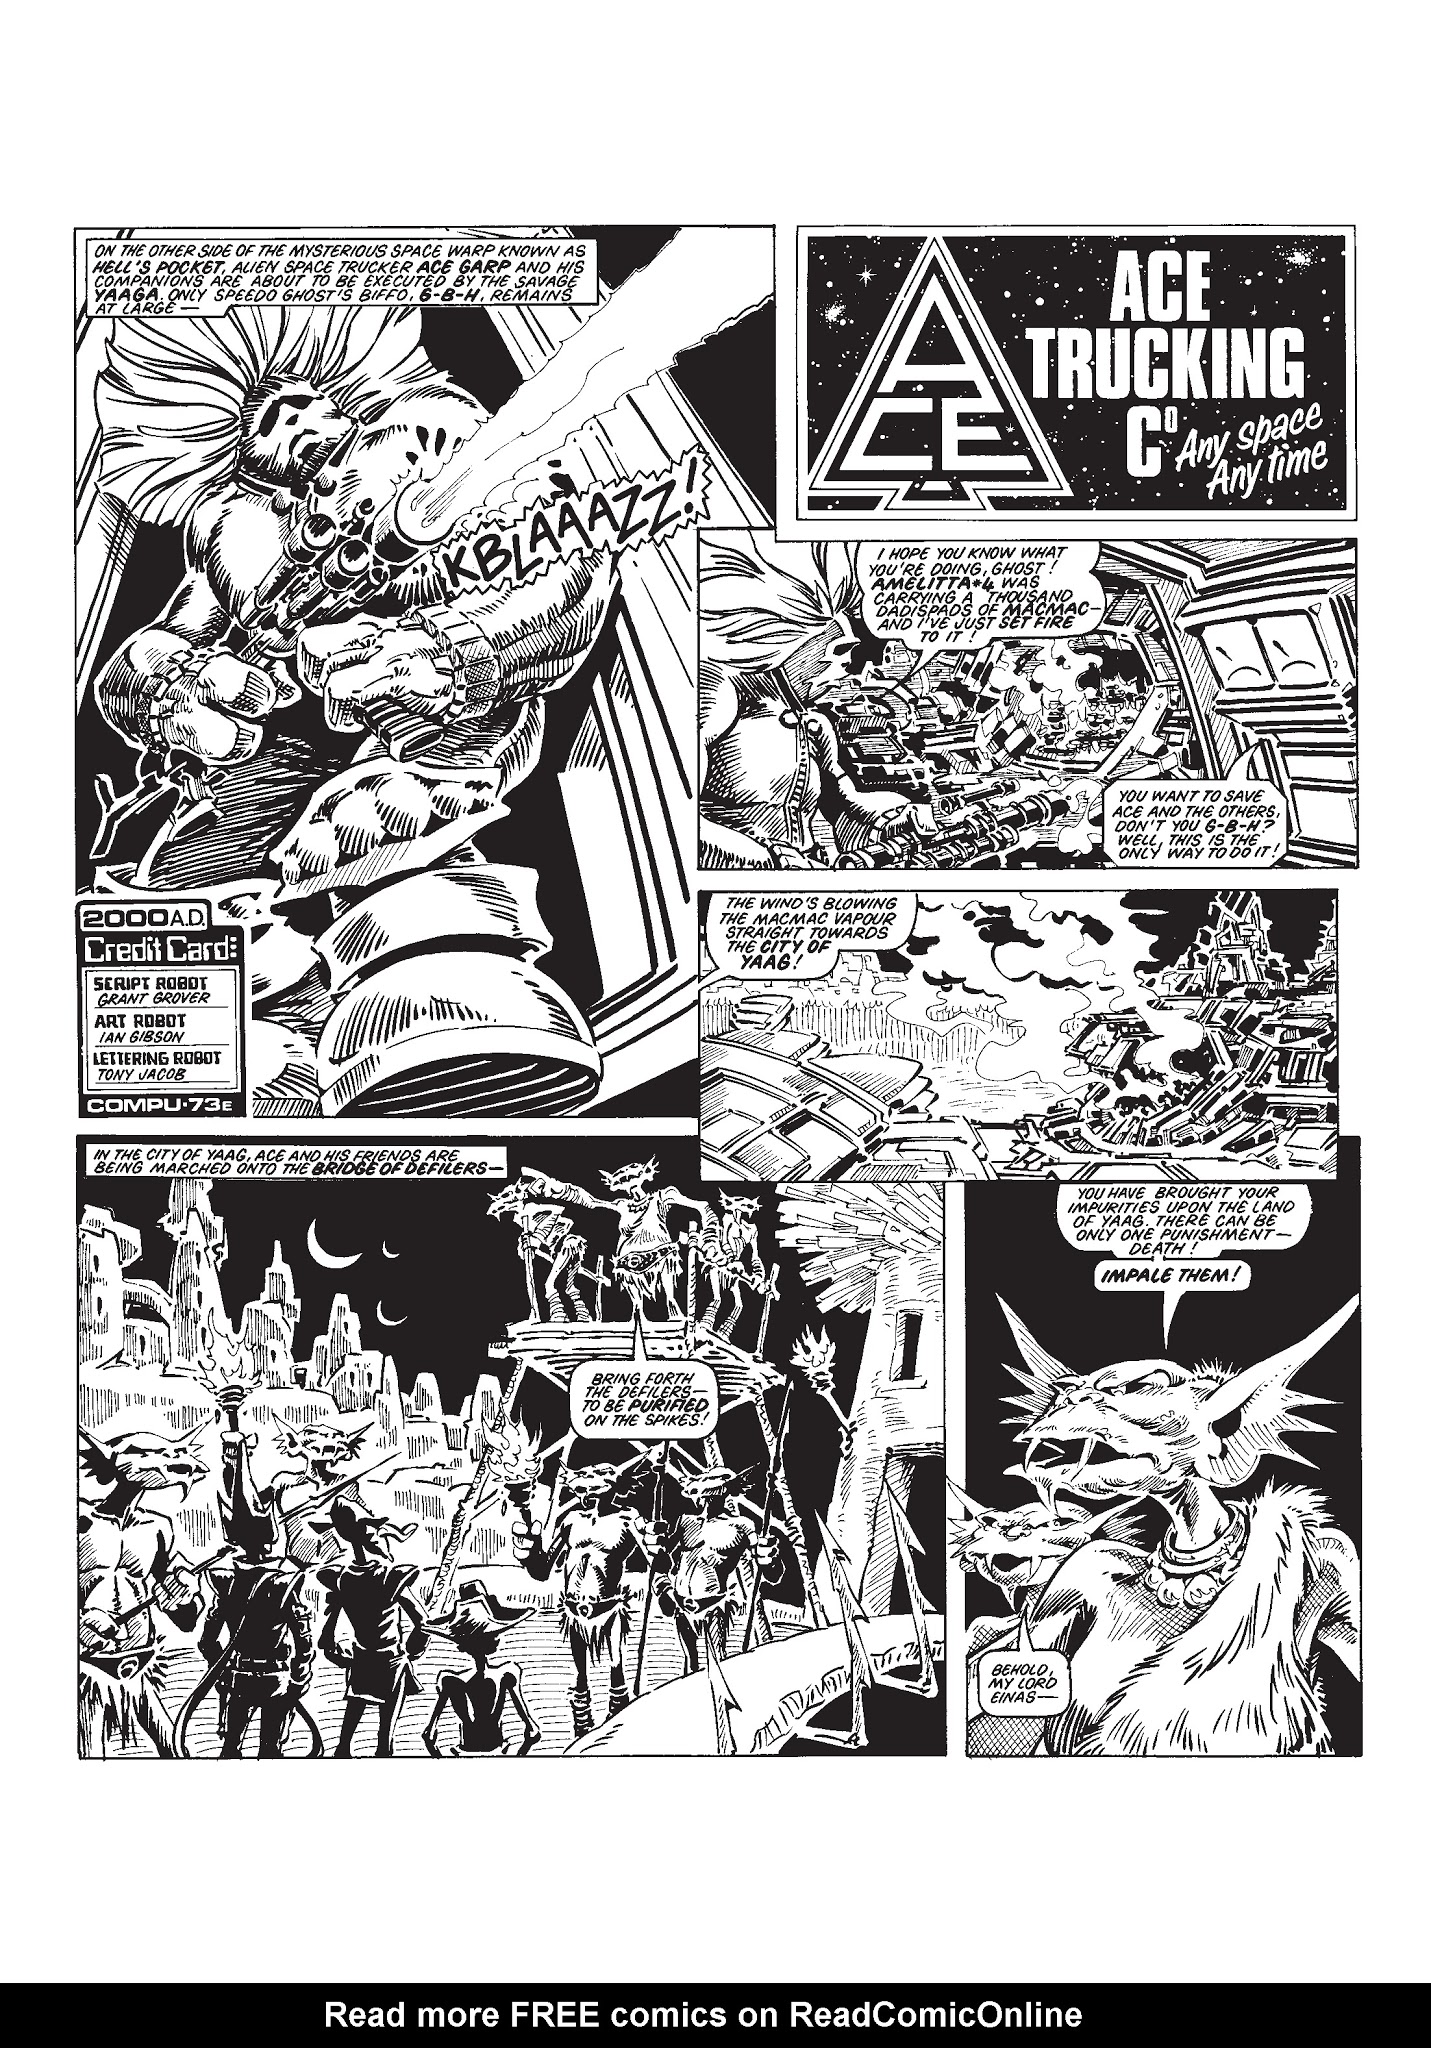 Read online The Complete Ace Trucking Co. comic -  Issue # TPB 1 - 42